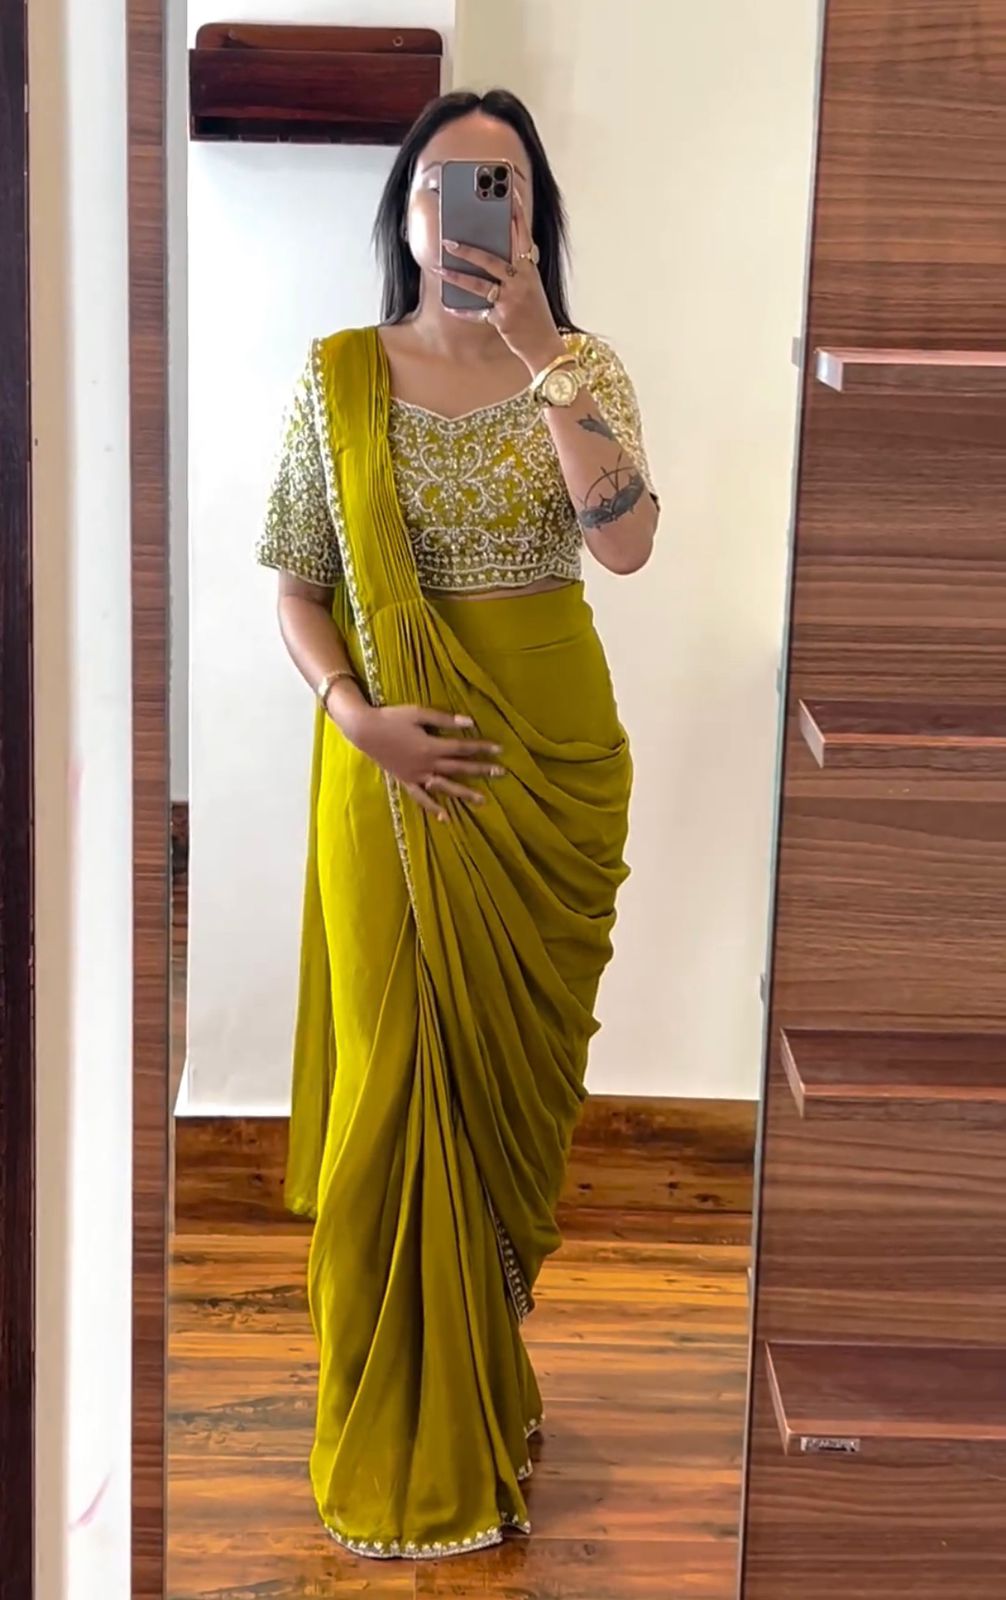 Cording Embroidery Saree with Matching Blouse & Belt